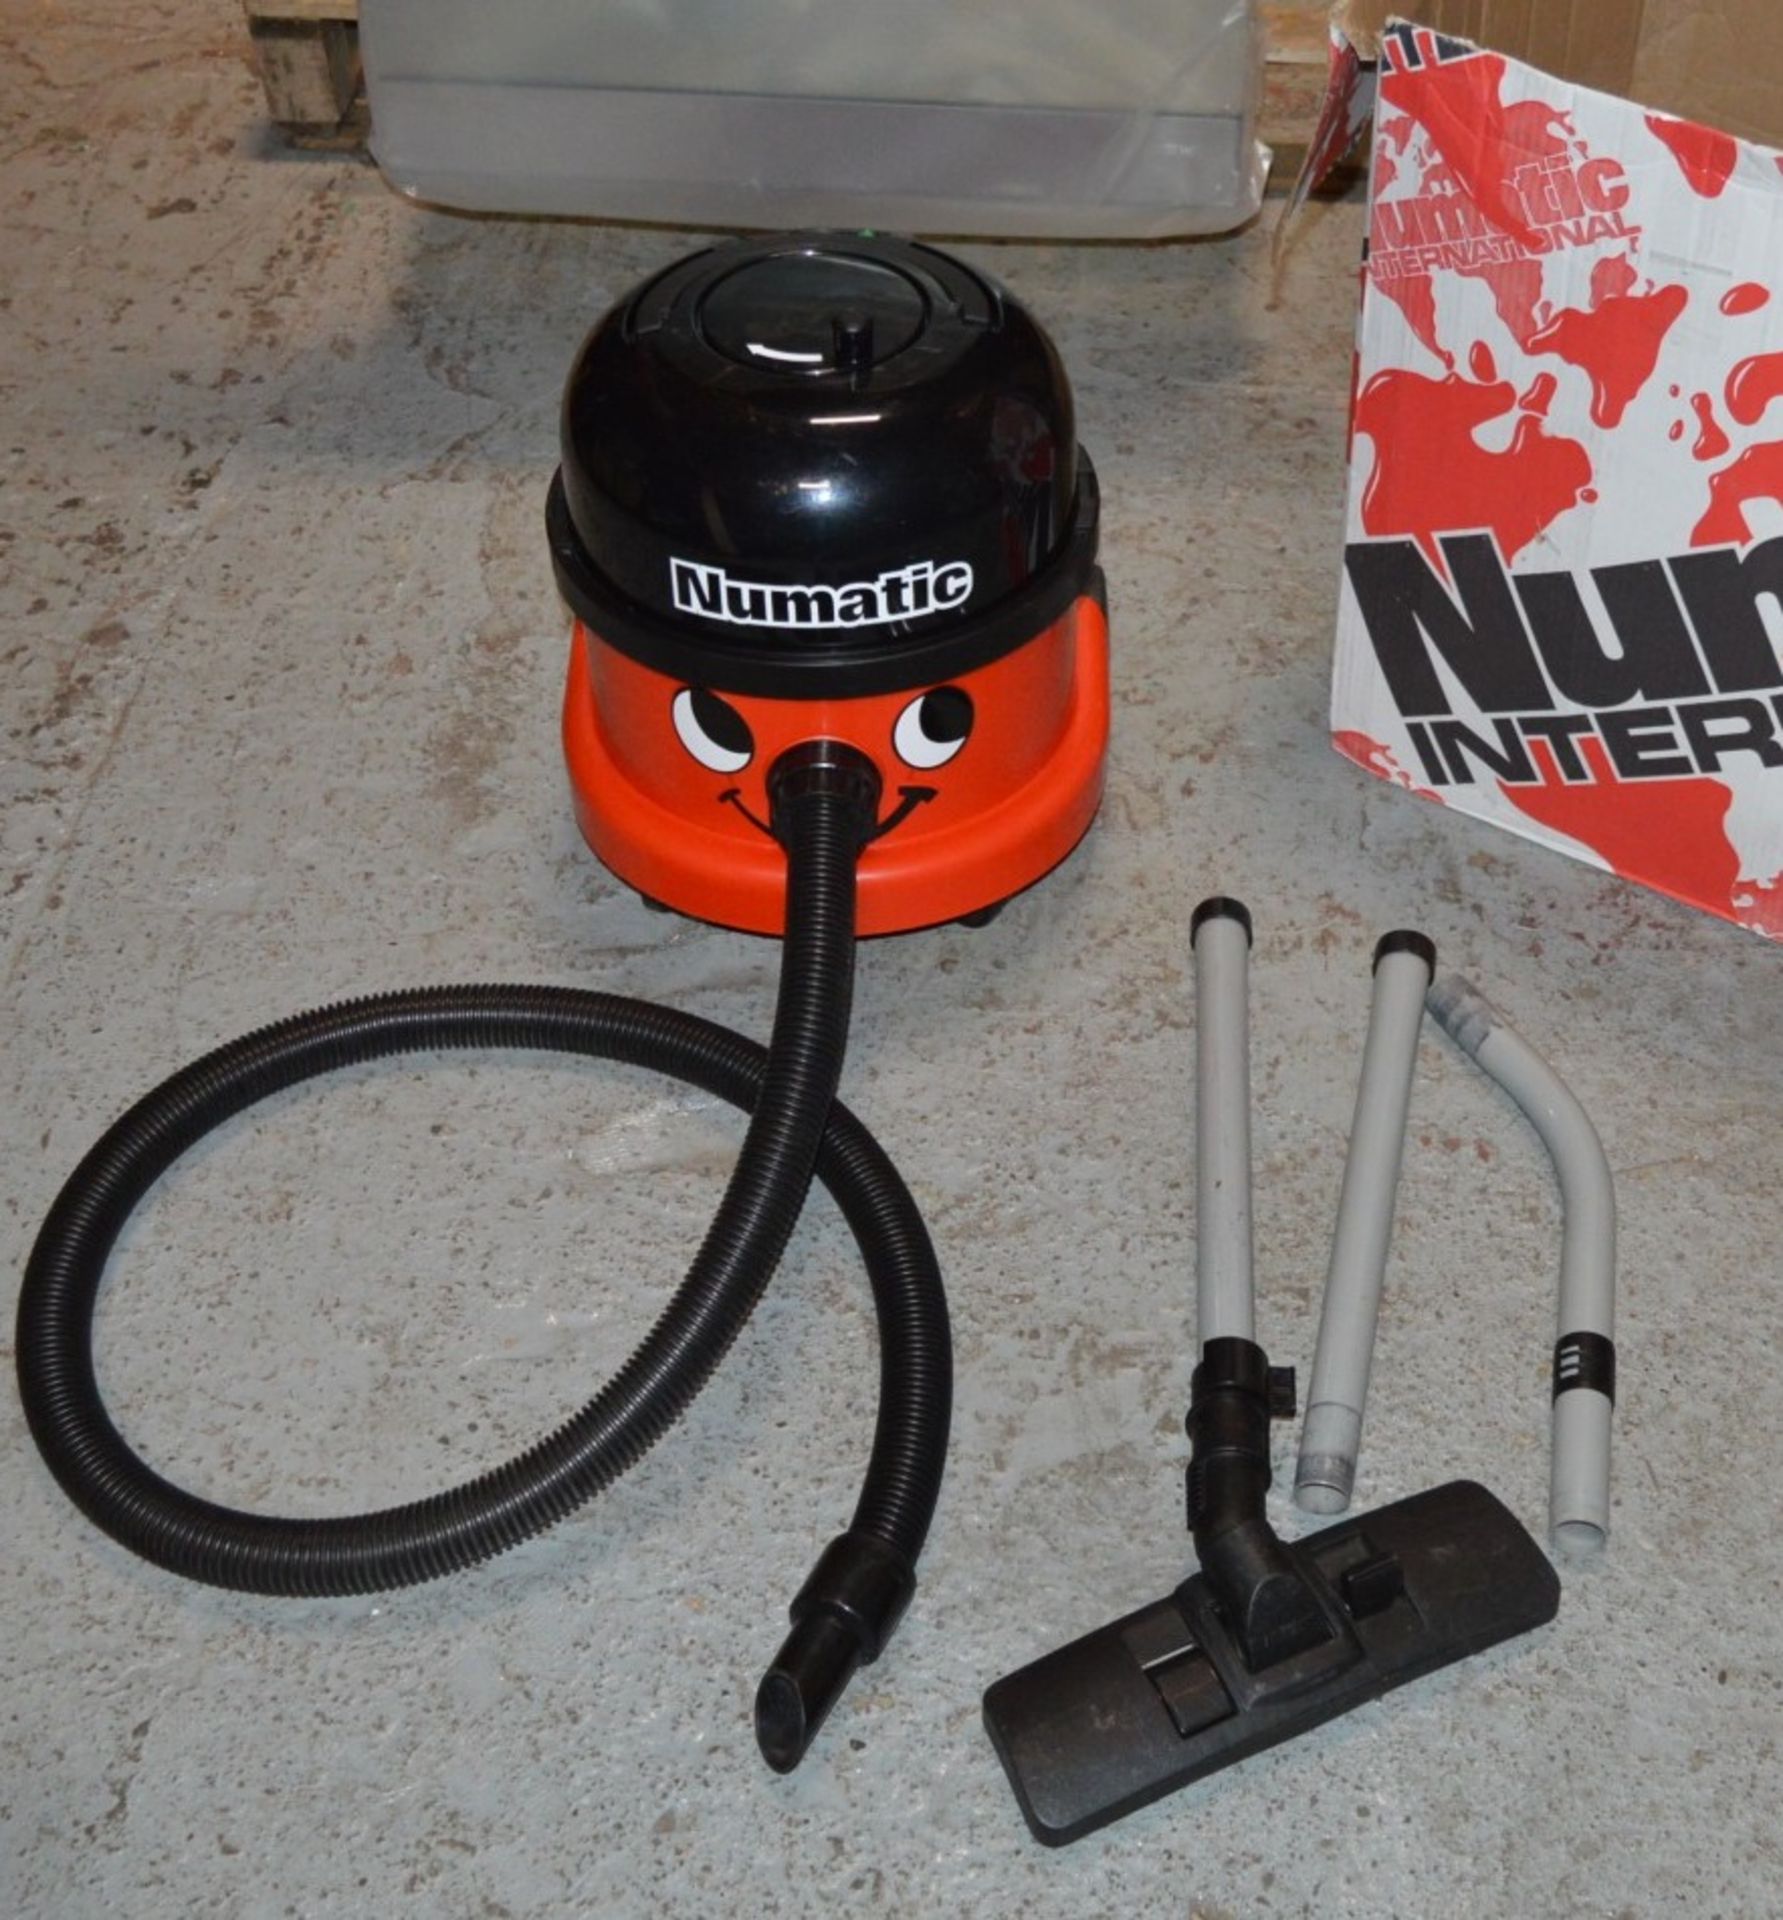 1 x Numatic NRV20021 620W Commercial Vacuum Cleaner - 9 Litre Capacity - CL010 - Good Working